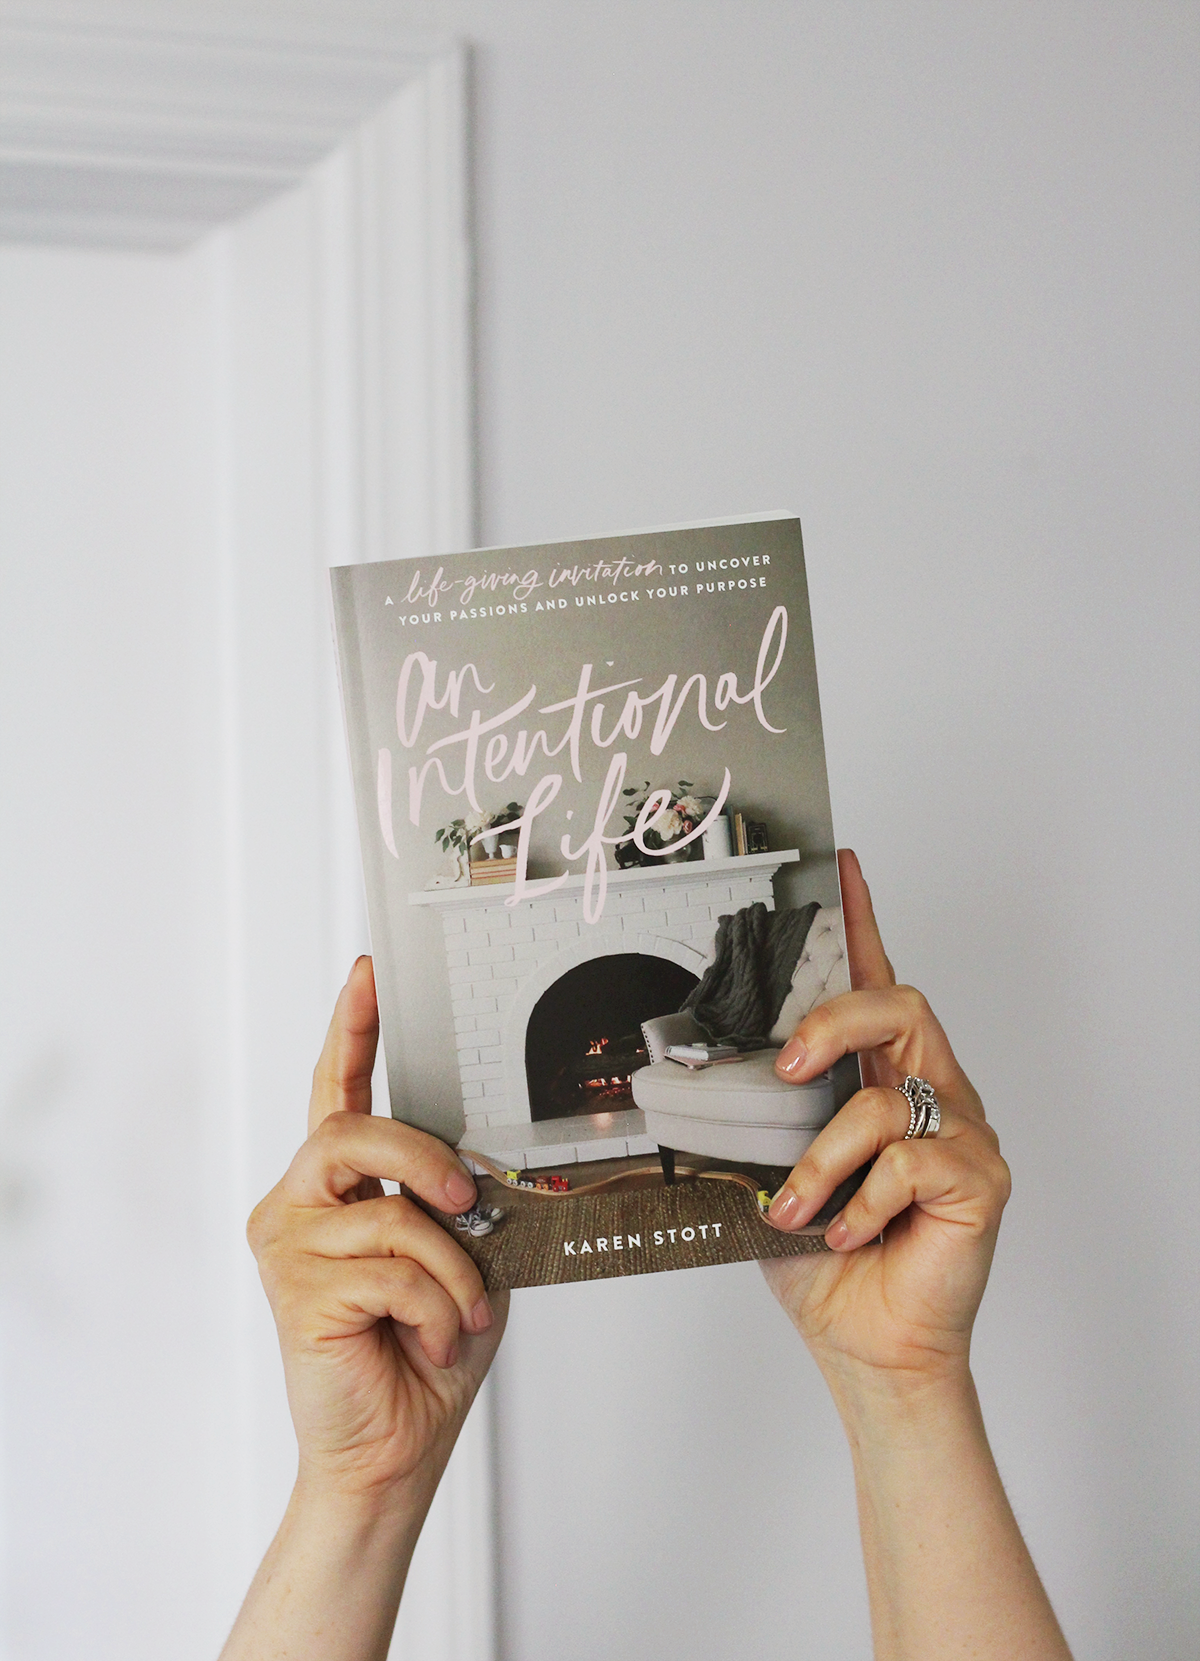 An Intentional Life Book by Karen Stott as part of Lily & Val Staycation Surprise Box Launching on Thursday, July 26th